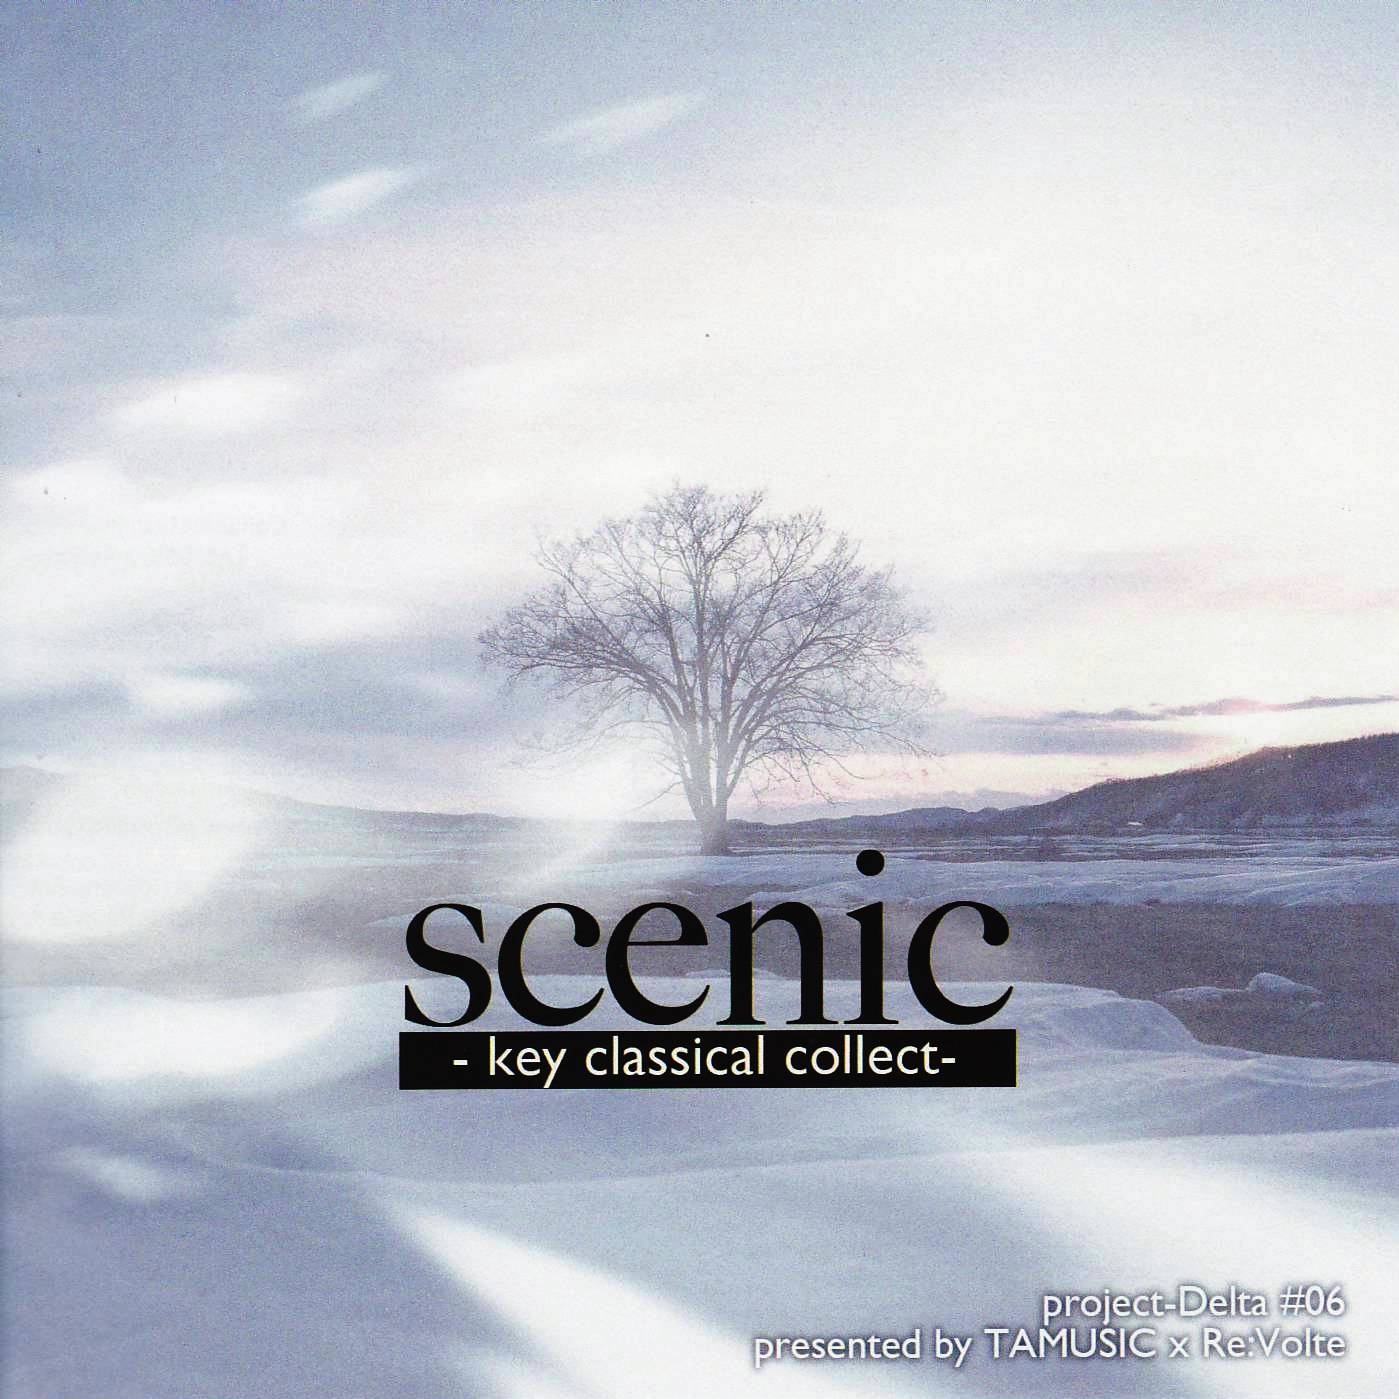 scenic -key classical collect-